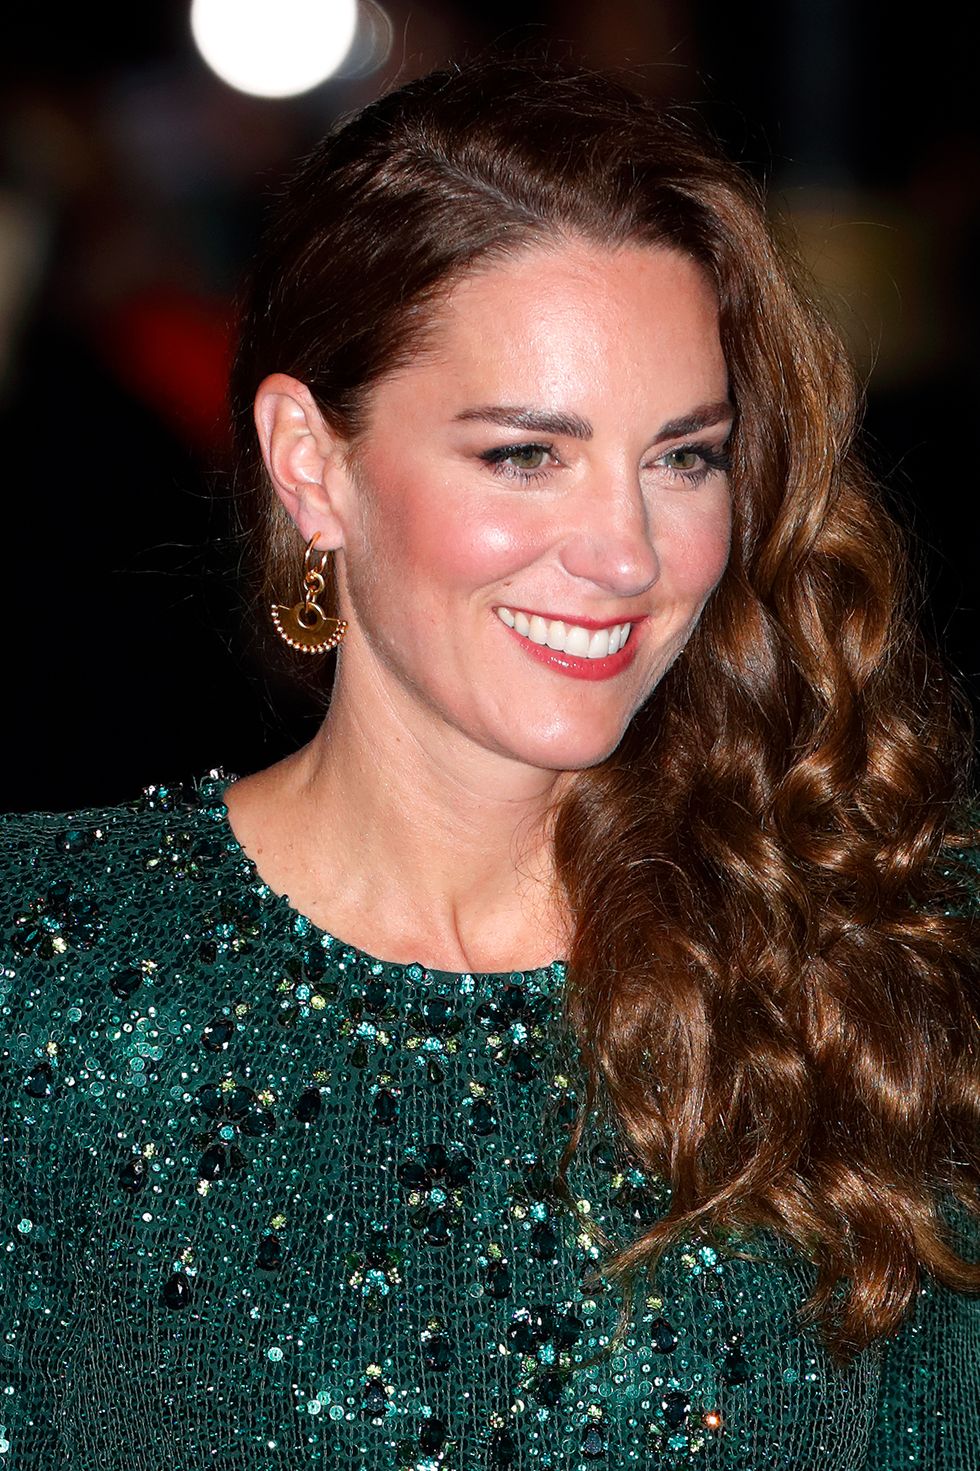 the duke and duchess of cambridge attend the royal variety performance